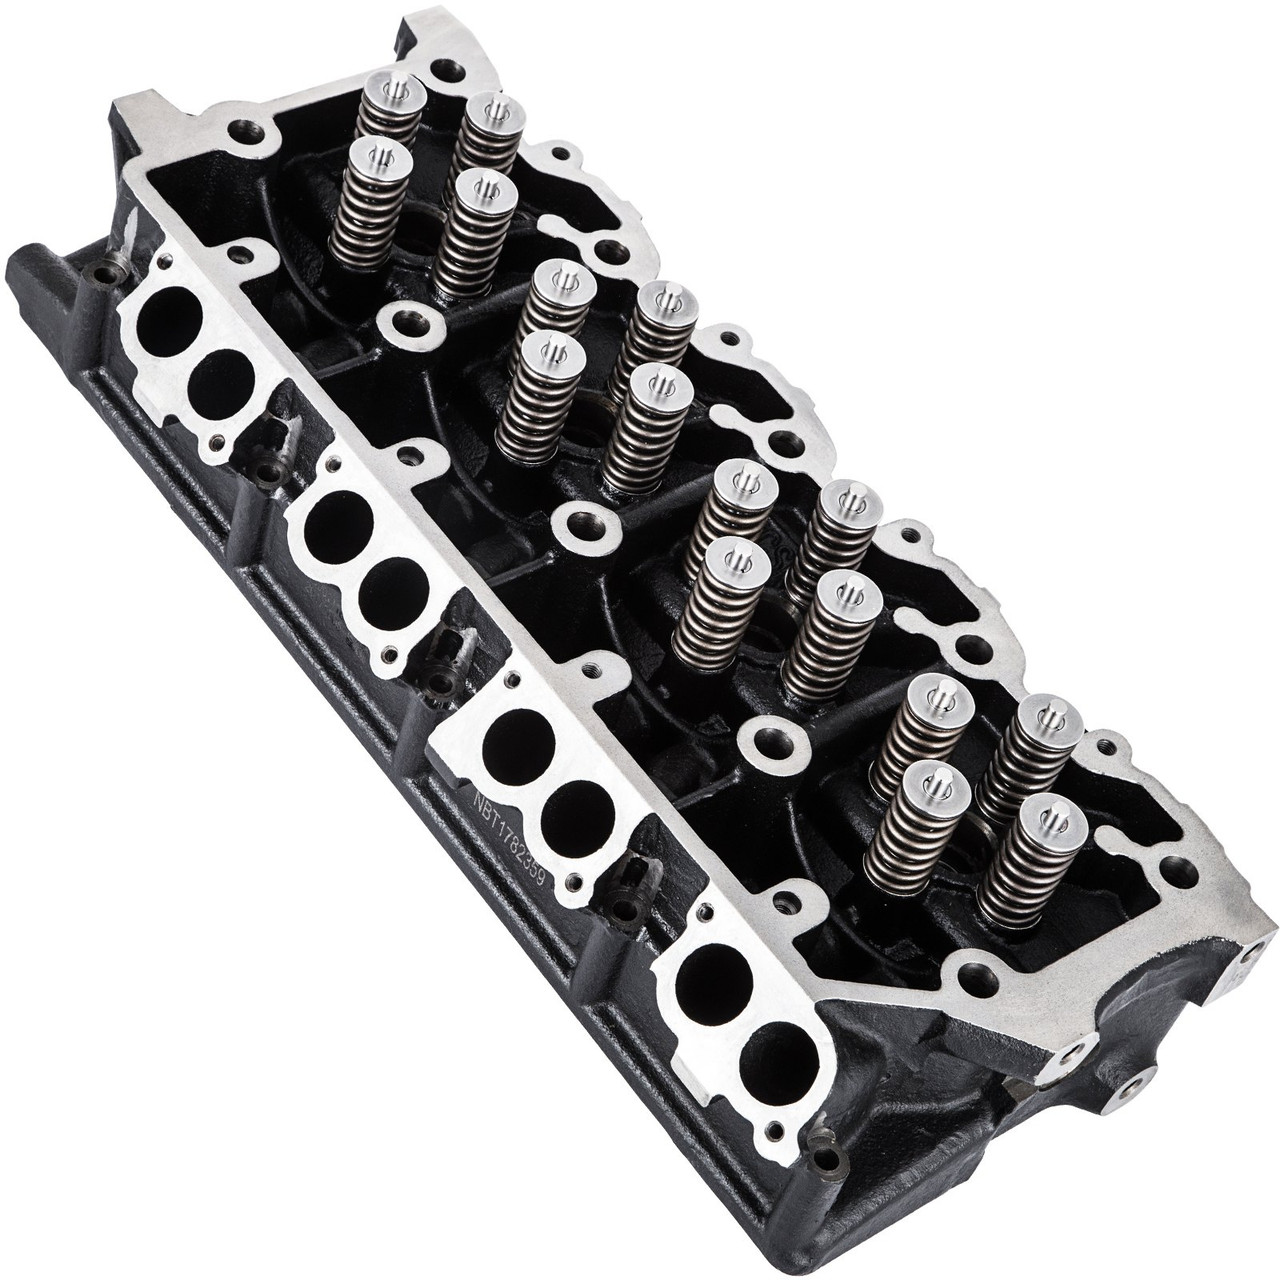 Cylinder Heads Powerstroke 6.4L Fit for 08-10 Ford F250 F350 F450 F550